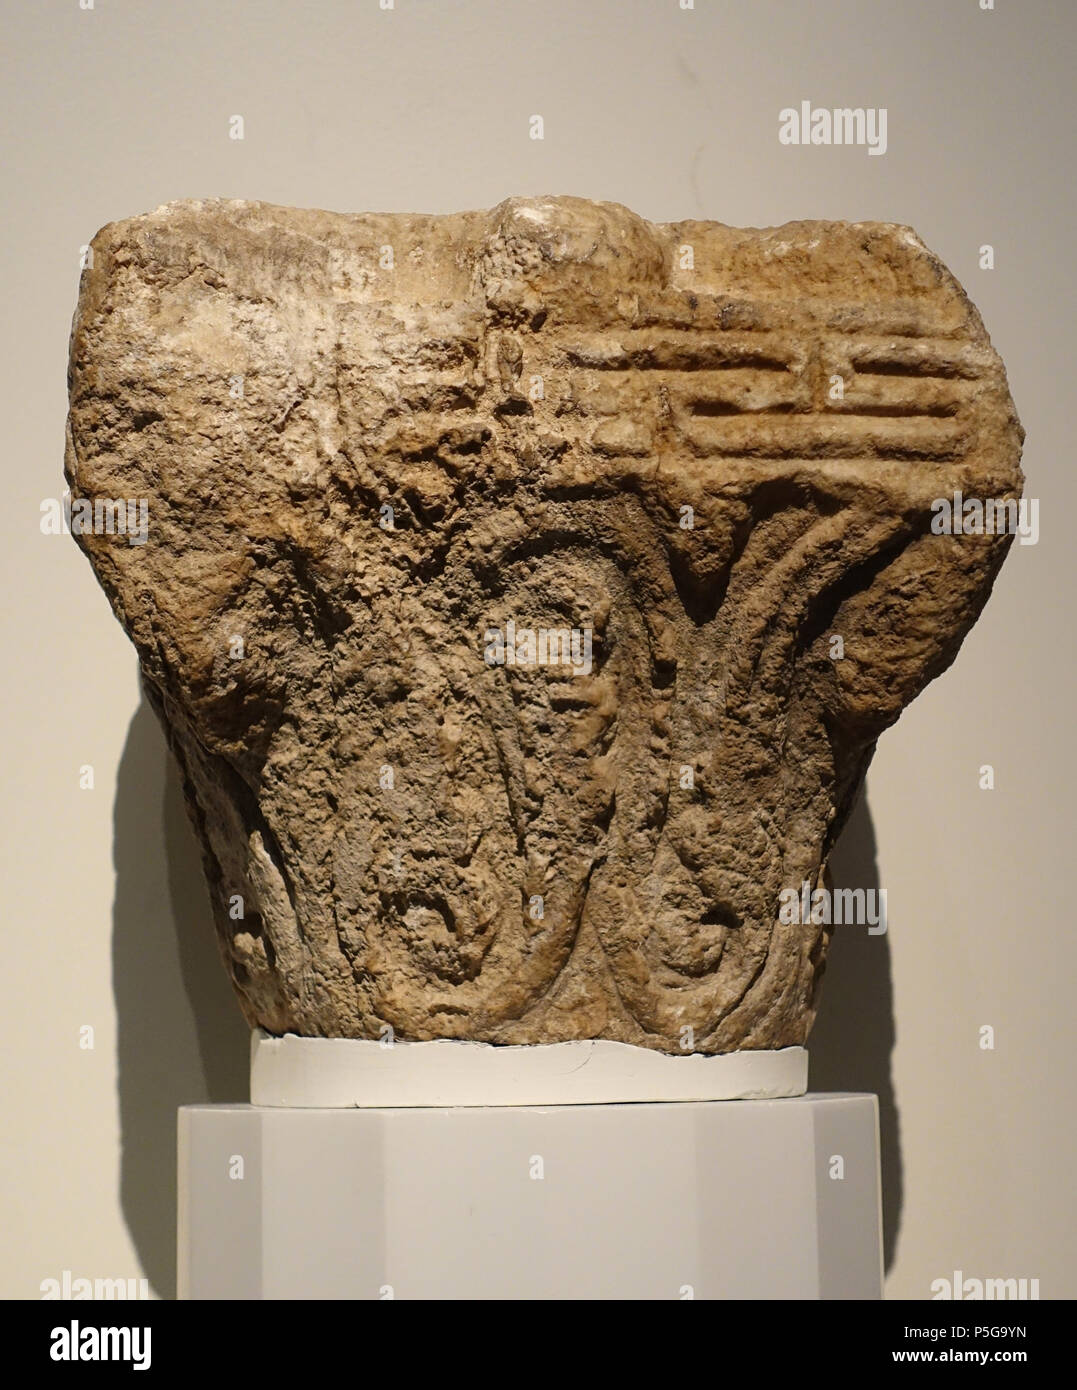 N/A. English: Exhibit in the Aga Khan Museum - Toronto, Canada. This work is old enough so that it is in the . Photography was permitted in the museum without restriction. 6 October 2015, 11:36:15. Daderot 371 Column capital, Historic Syria, late 7th to early 8th century AD, marble, 2 of 2 - Aga Khan Museum - Toronto, Canada - DSC06314 Stock Photo